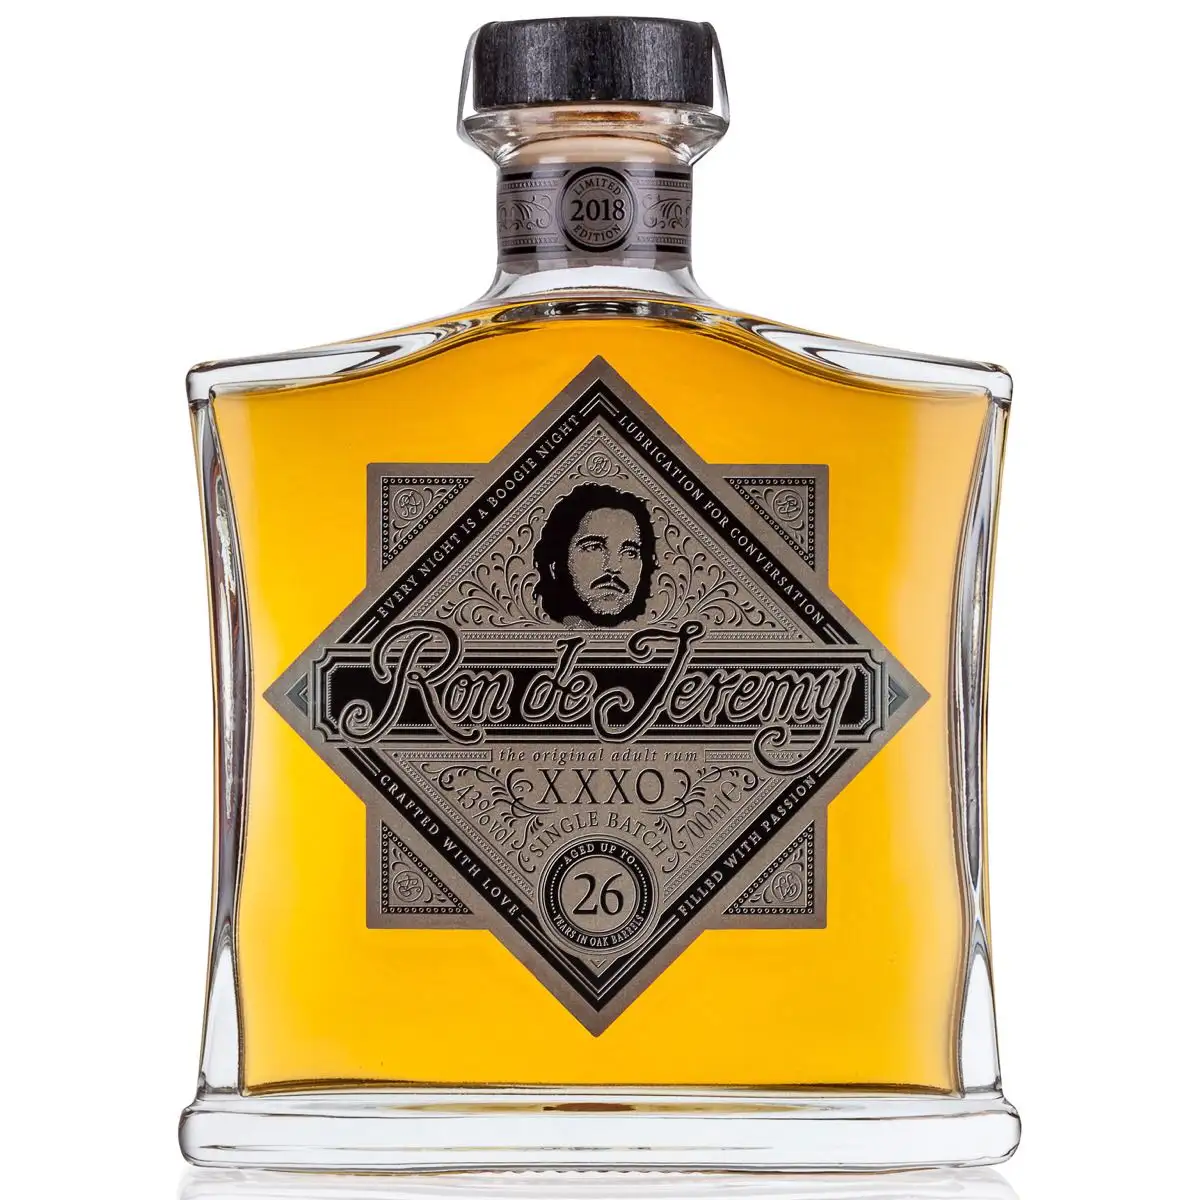 Image of the front of the bottle of the rum Ron de Jeremy XXXO Solera 26